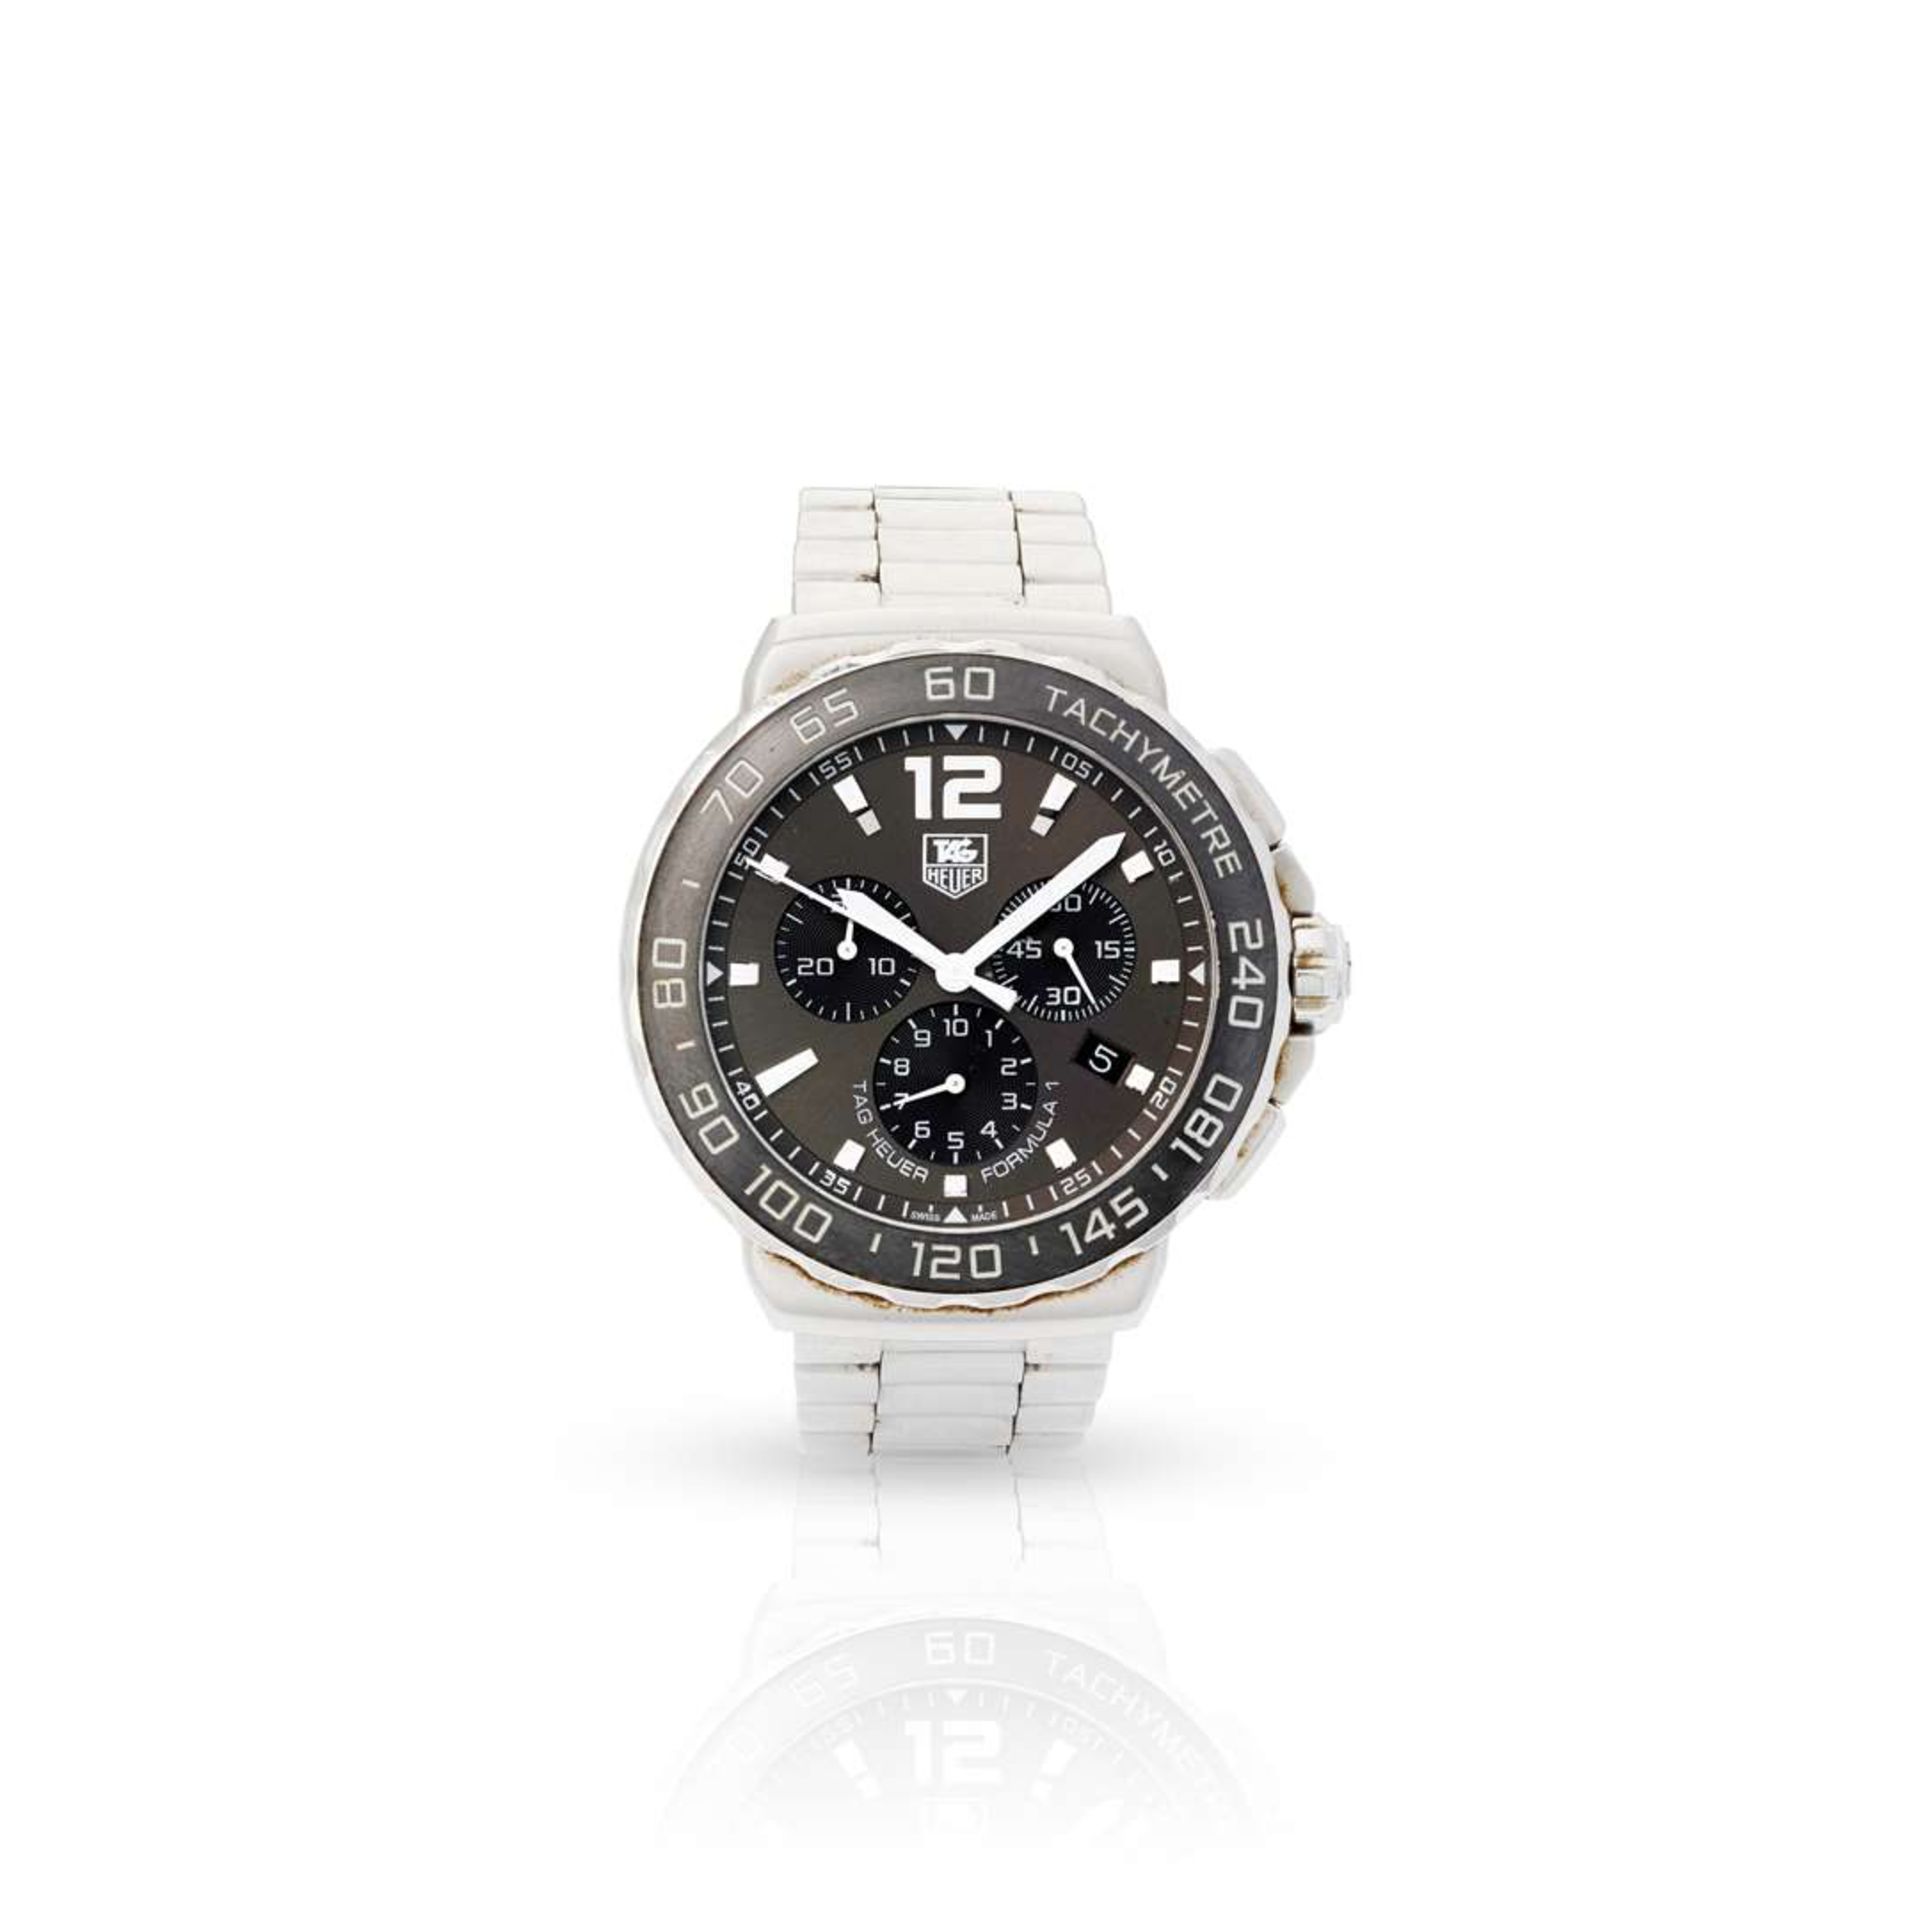 Tag Heuer. A stainless steel quartz chronograph wristwatch